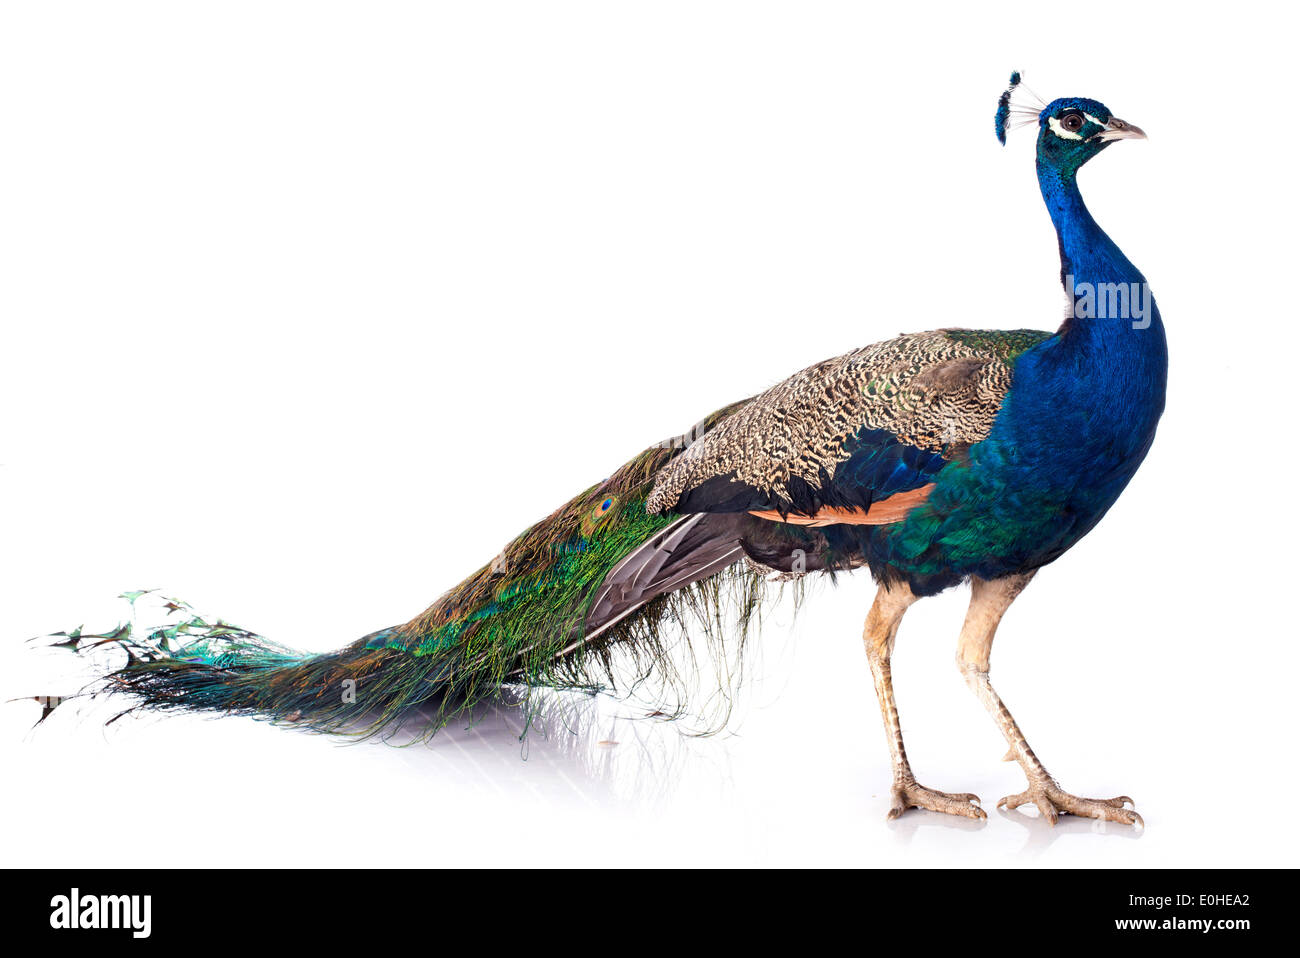 male peacock in front of white background Stock Photo